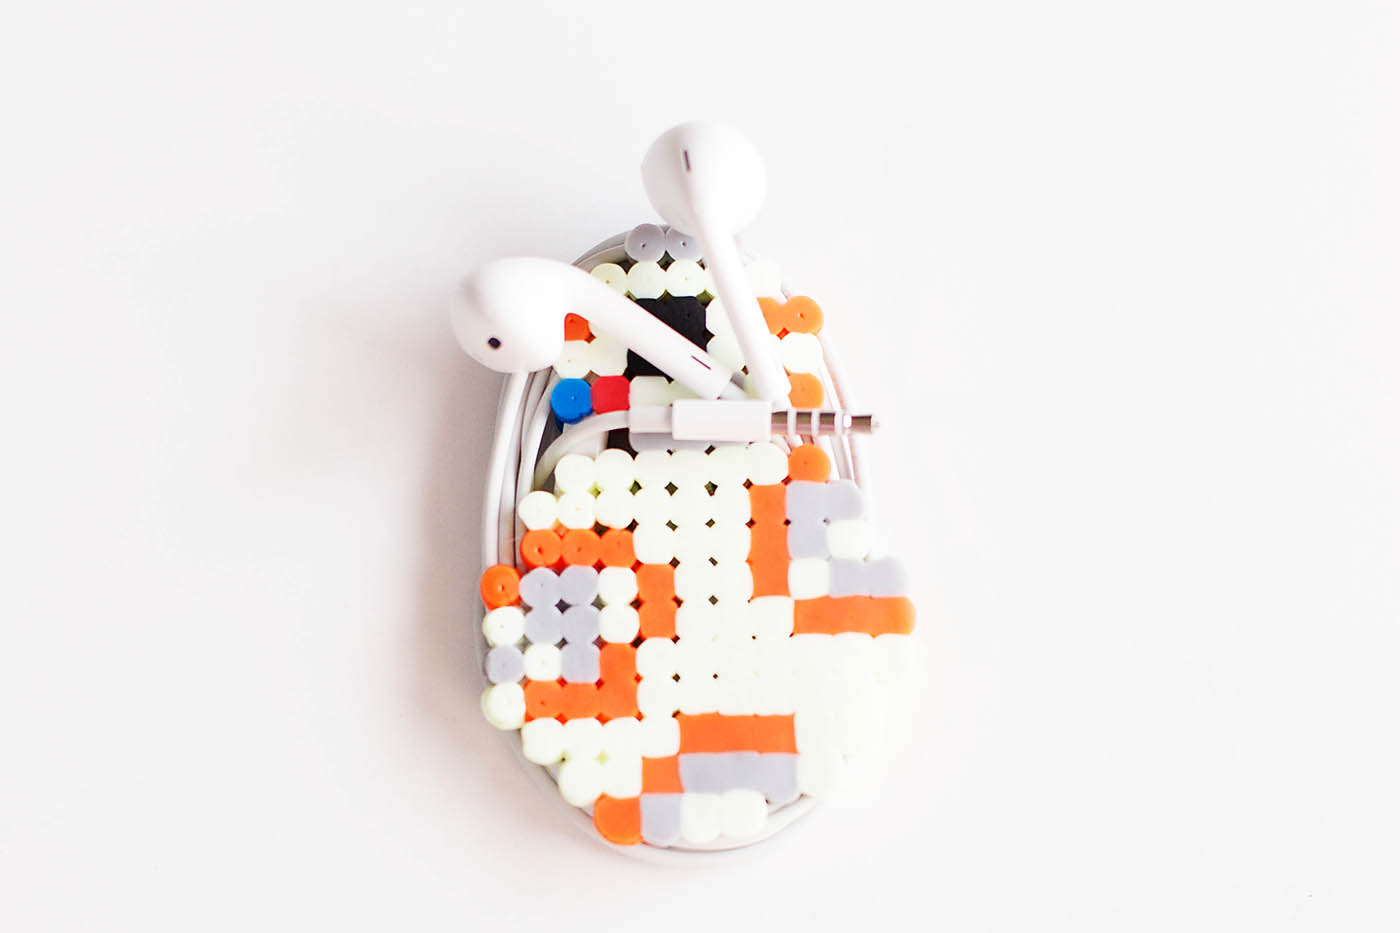 DIY BB8 perler bead cord keeper. Make your droid anyway you want! Such fun Star Wars craft. We love BB-8!